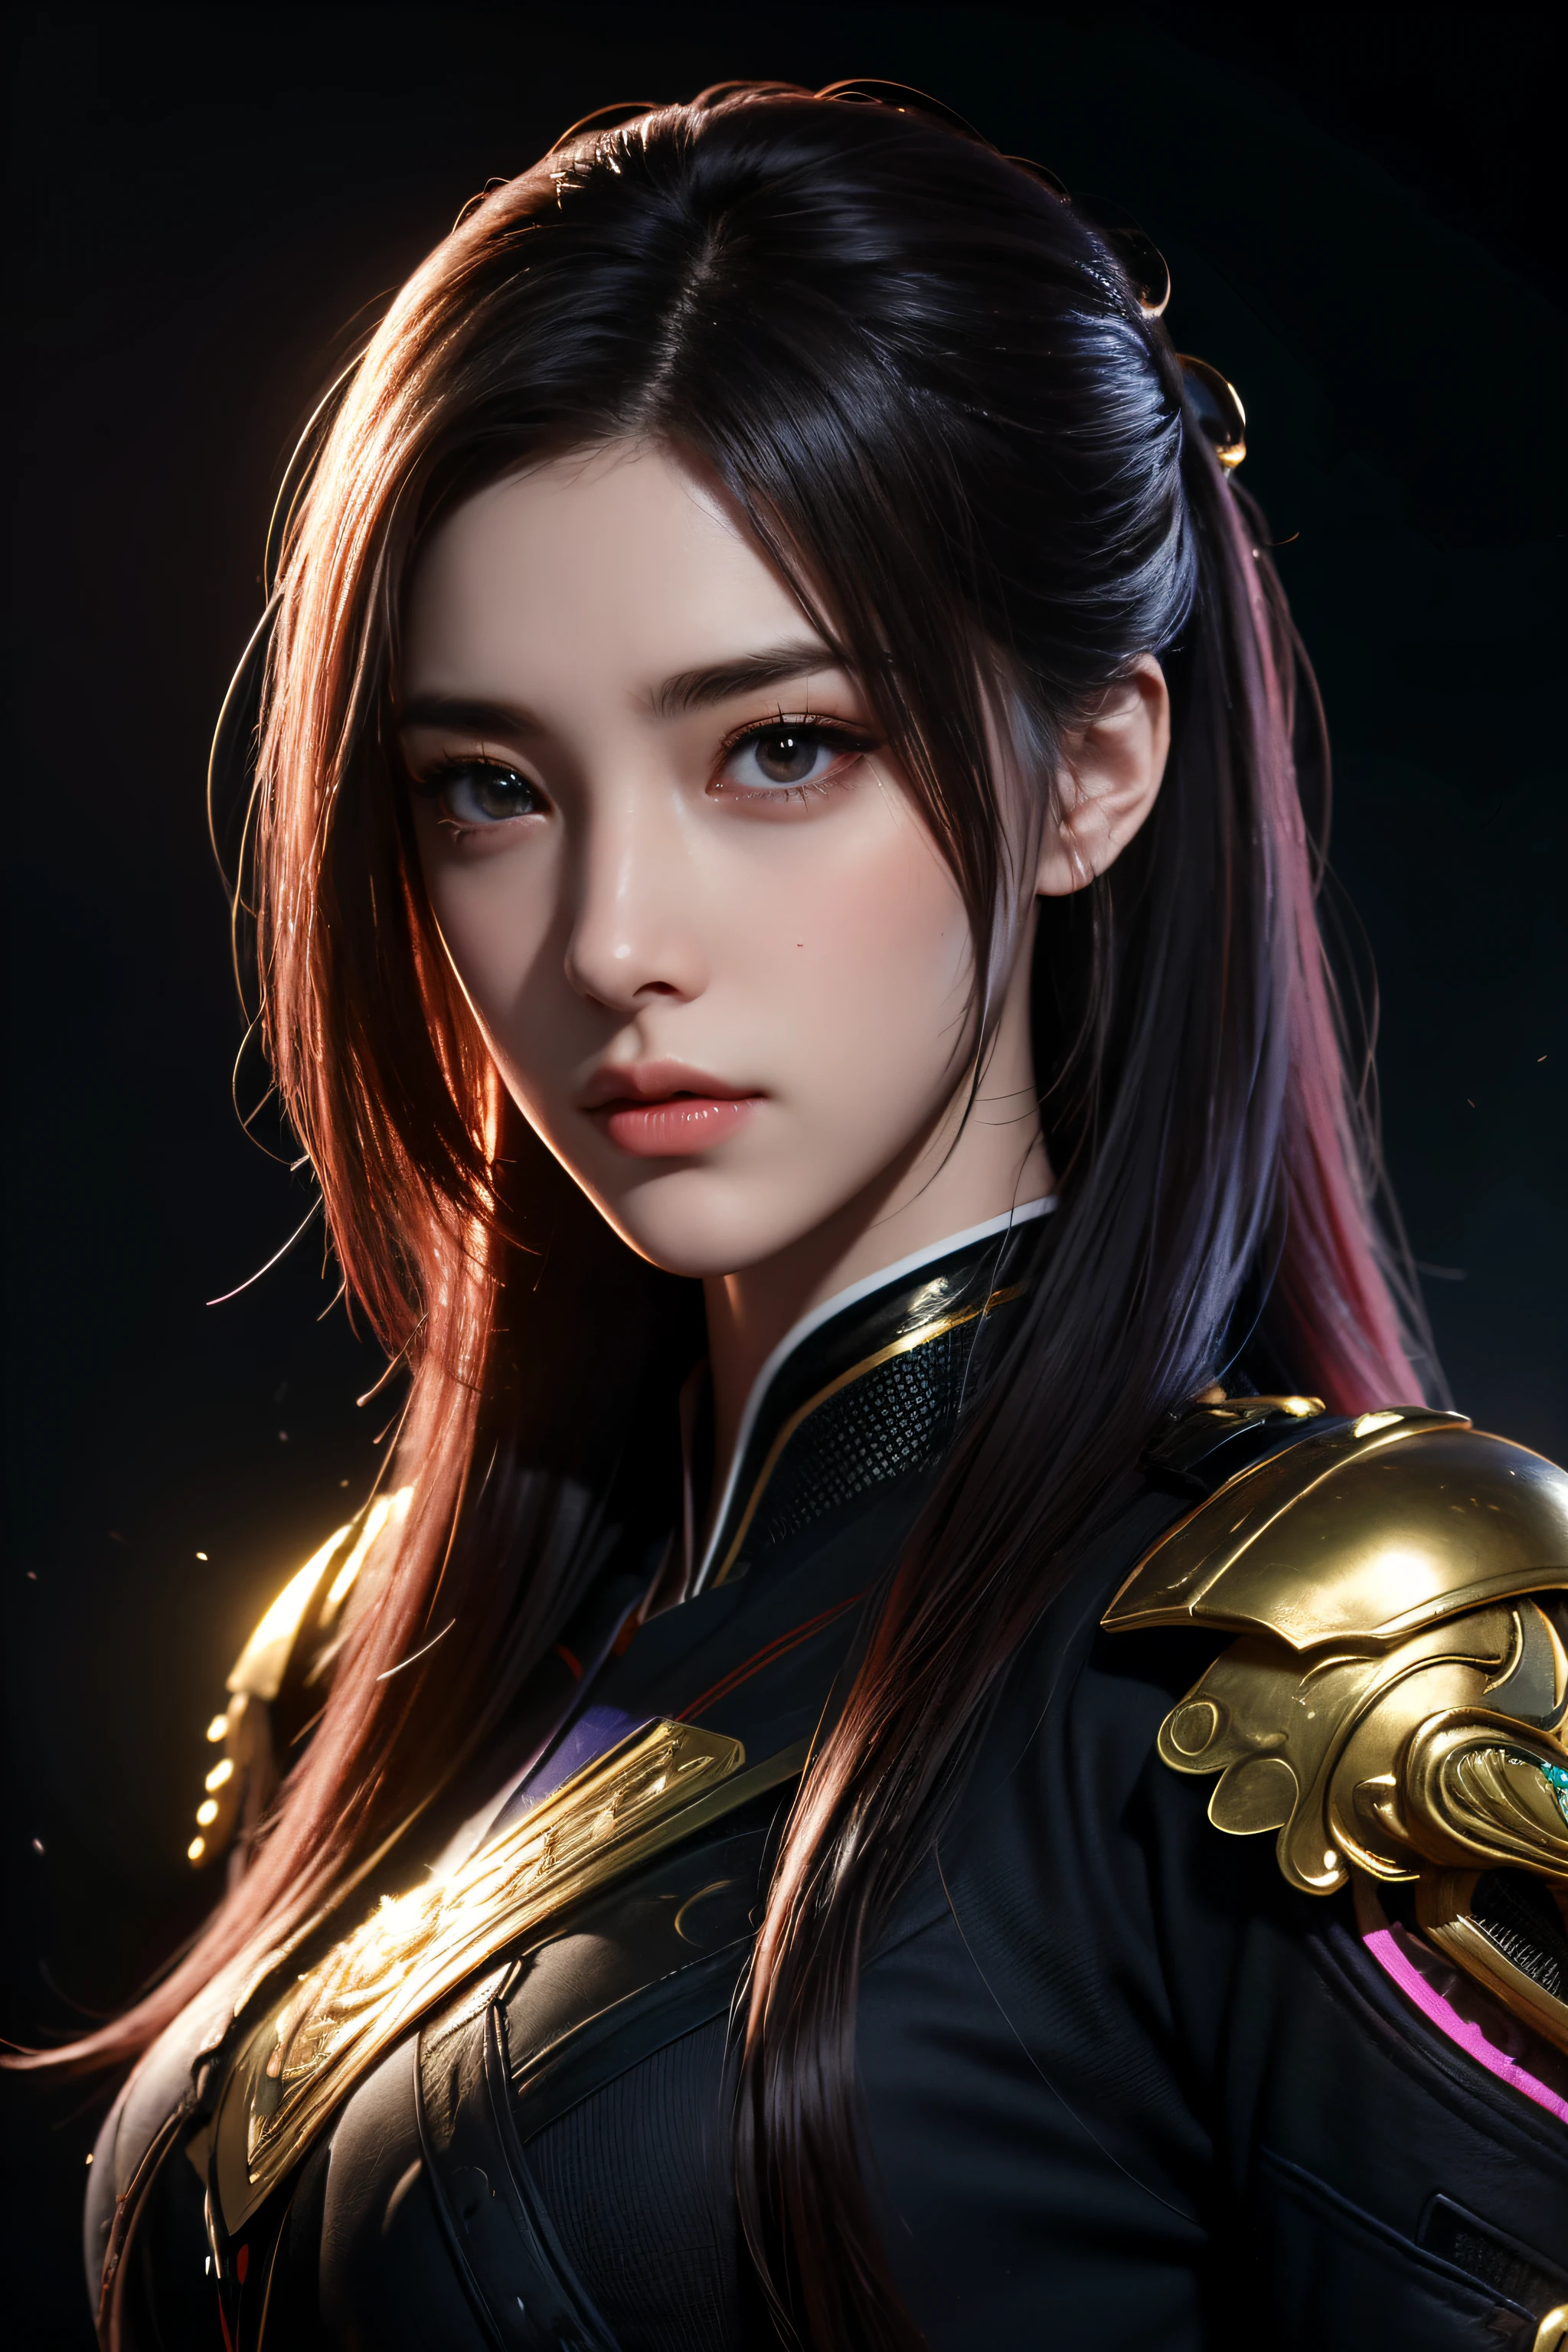 High quality,High resolution,Masterpiece,8k,(Exaggerated photos),(Portrait),digital photography,(realism:1.4),20 year old girl,Exquisite appearance,purple eyes,red eyeshadow,((cyberpunk style)),Random hairstyle, colorless hair),,(,combat uniform,openwork design,Shoulder pads,complex clothing styles,Beautiful signs),shut your mouth,sullen,smile,Cold and serious,An extremely meticulous expression,real details,light magic,Posing for pictures,oc render reflection textures